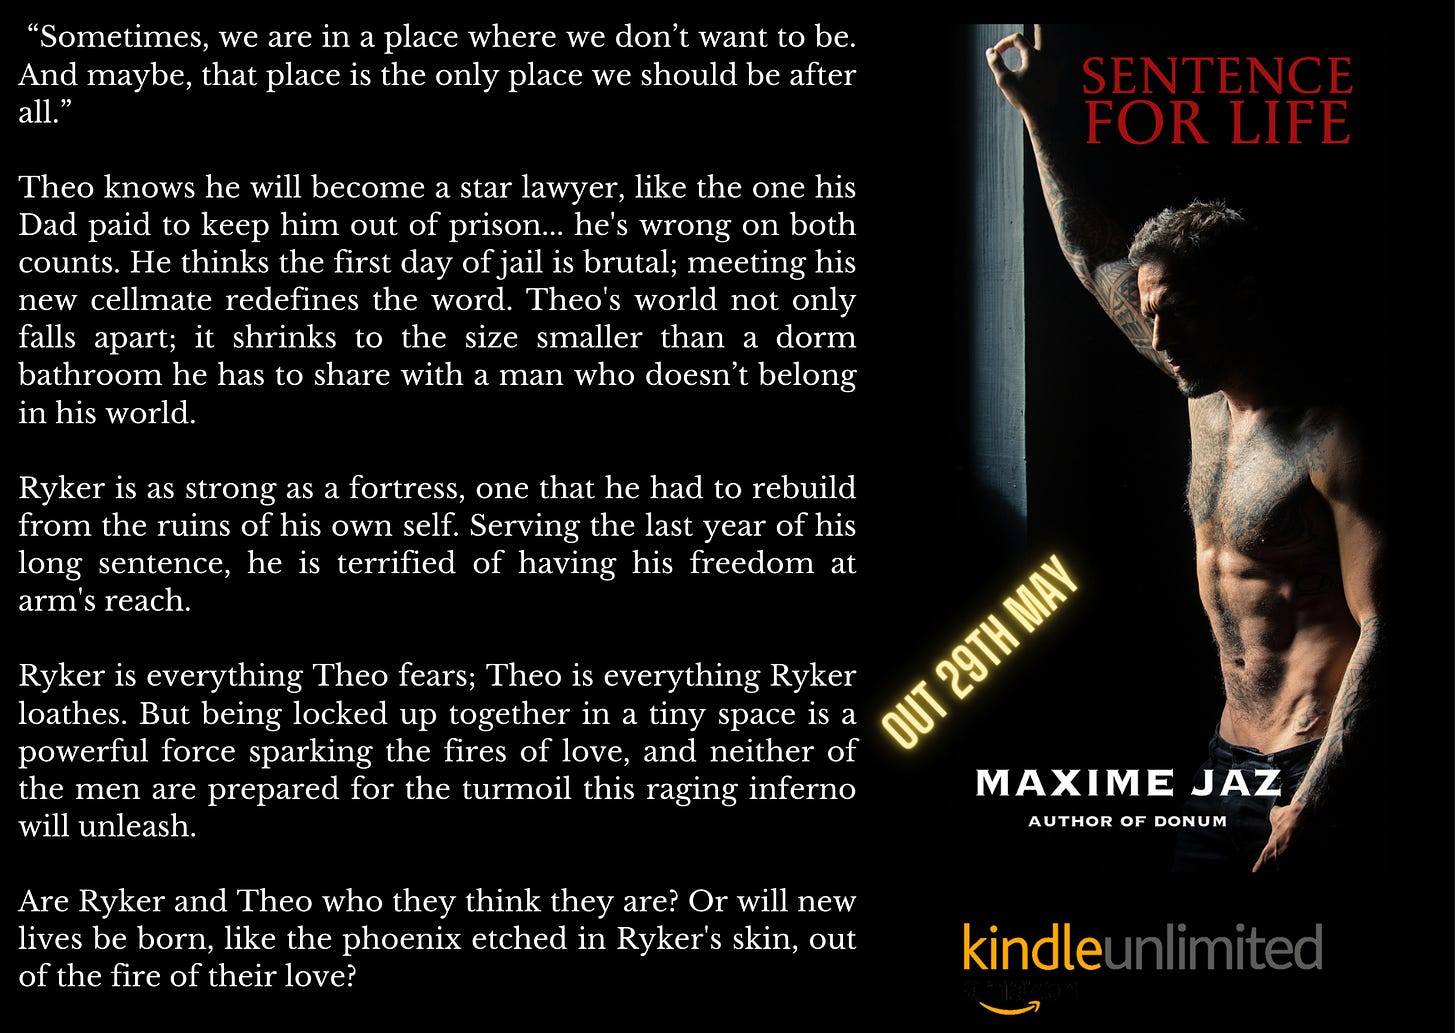 cover of Sentence for Life by Maxime Jaz. Black cover with red title top right and author name in white middle bottom, Author of Donum under it. A half-naked muscled, tattooed man with body hair is leaning on a wall portion, his face half-masked by shadows, his left thumb hooked in the pocket of low cut pants. Out May 29 also on KU blurb on the left